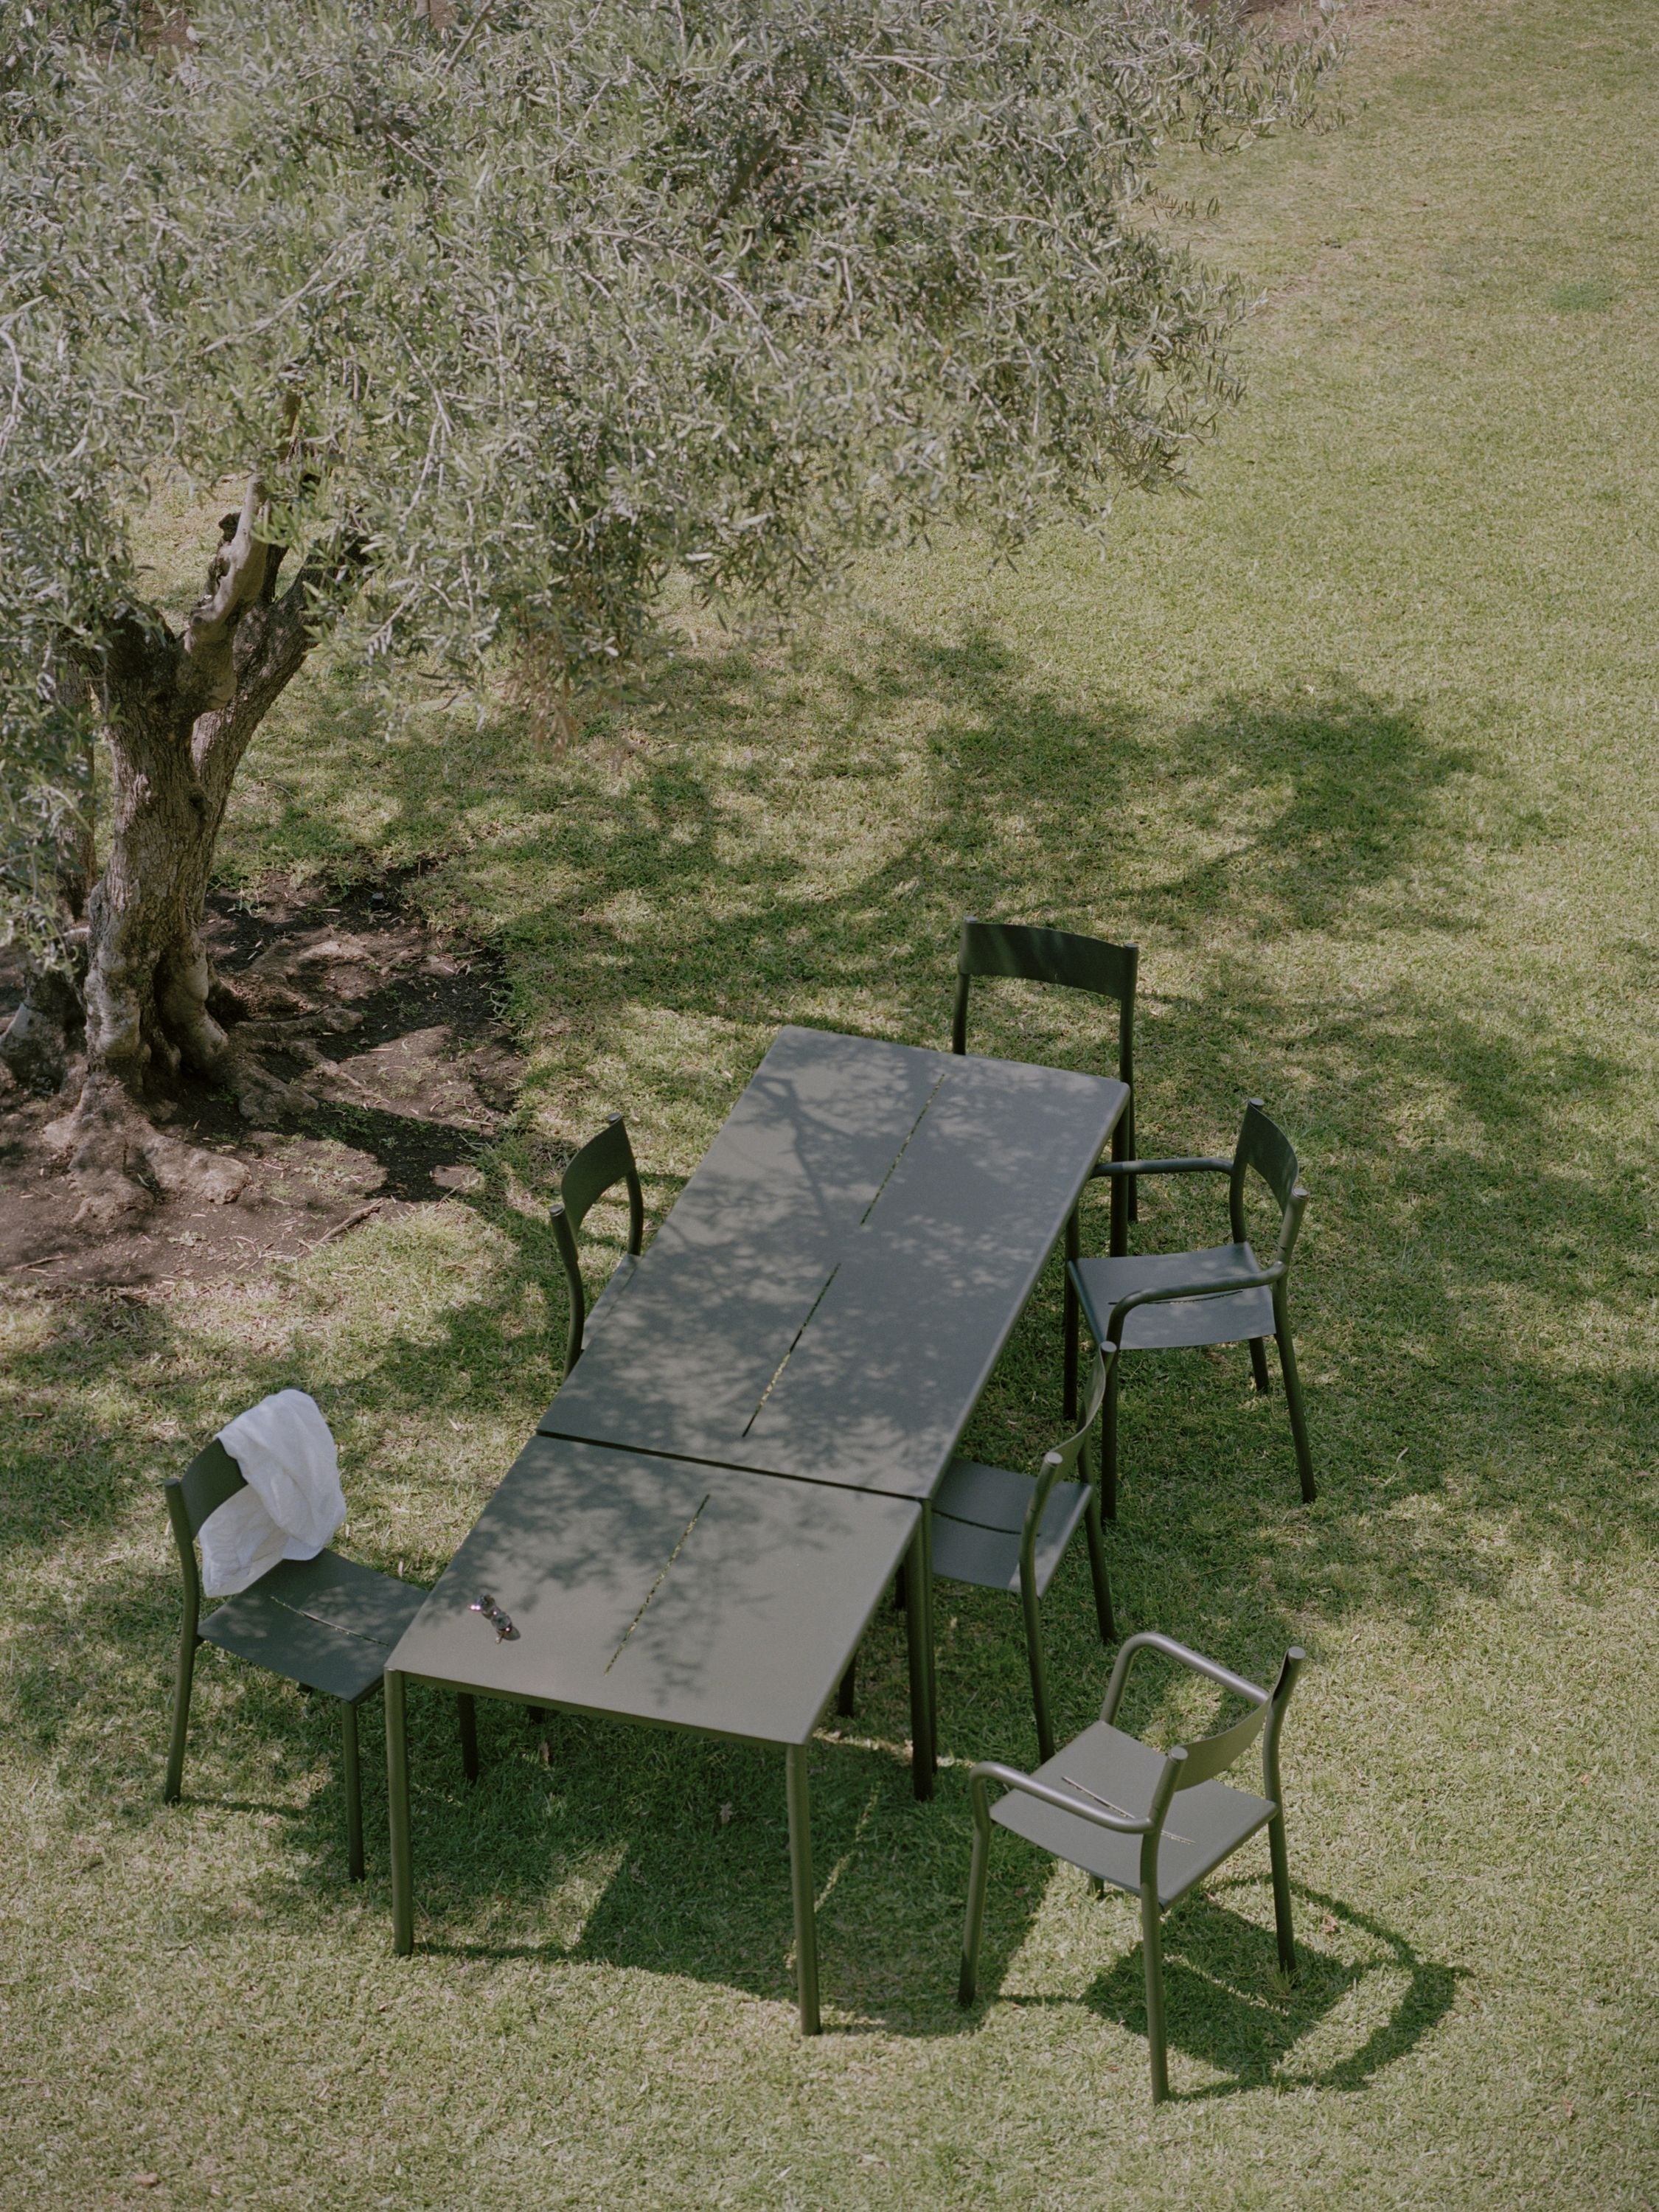 New Works May Table 85 Cm, Dark Green